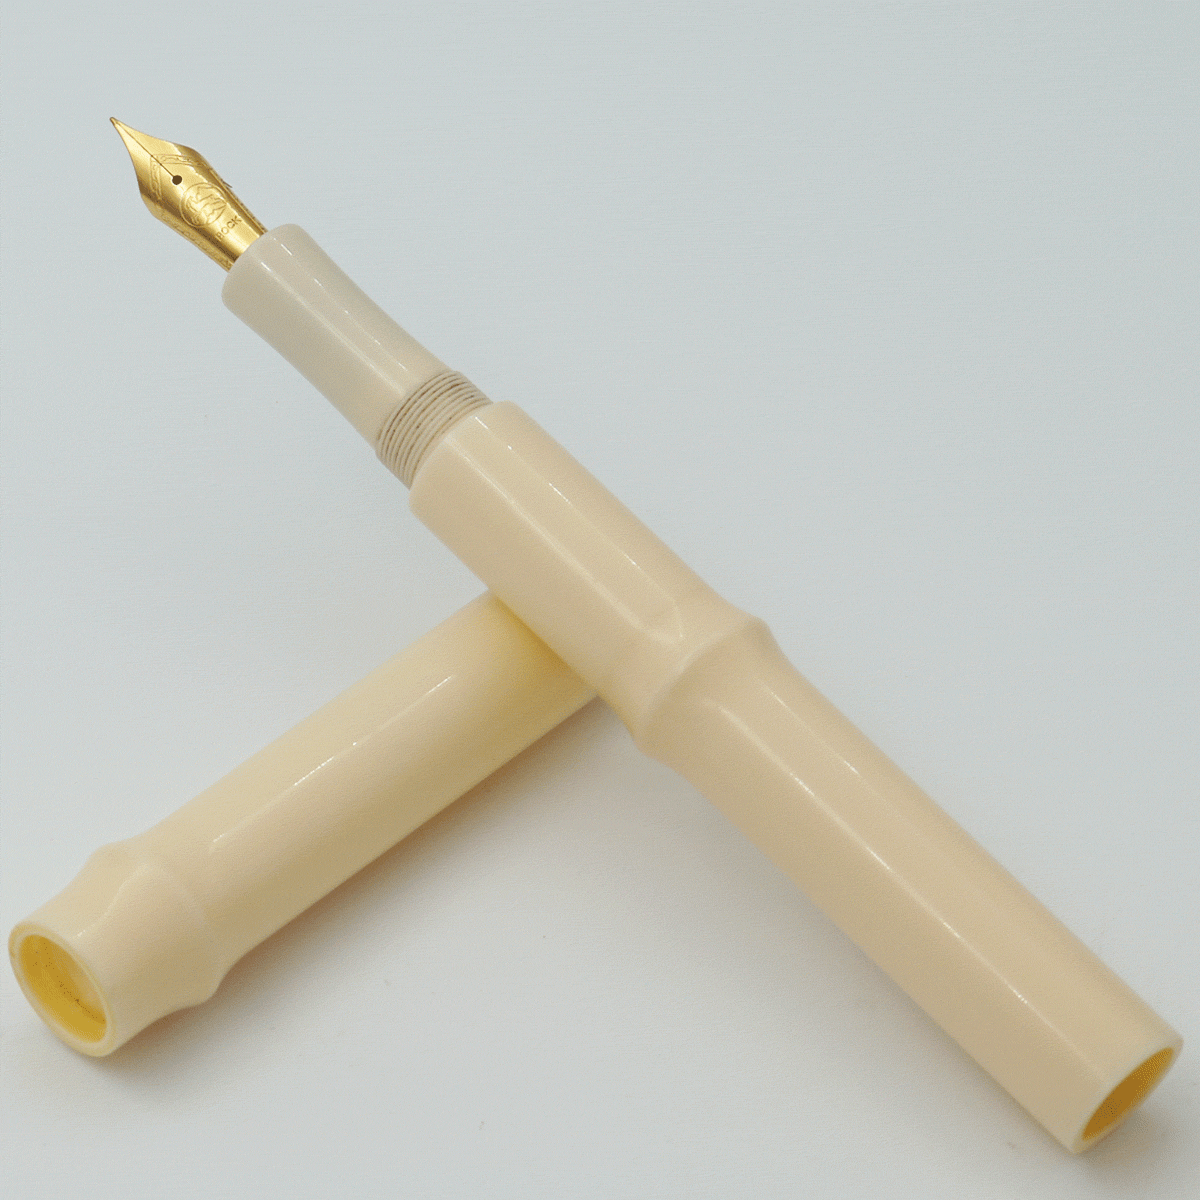 Ranga Handmade Giant Sugarcane Model Regular Acrylic R5 Solid Ivory Color Body And Without Clip German Bock Nib Converter Type Fountain Pen (Nib Can be Customized With Fine or Medium or Broad) SKU 24294